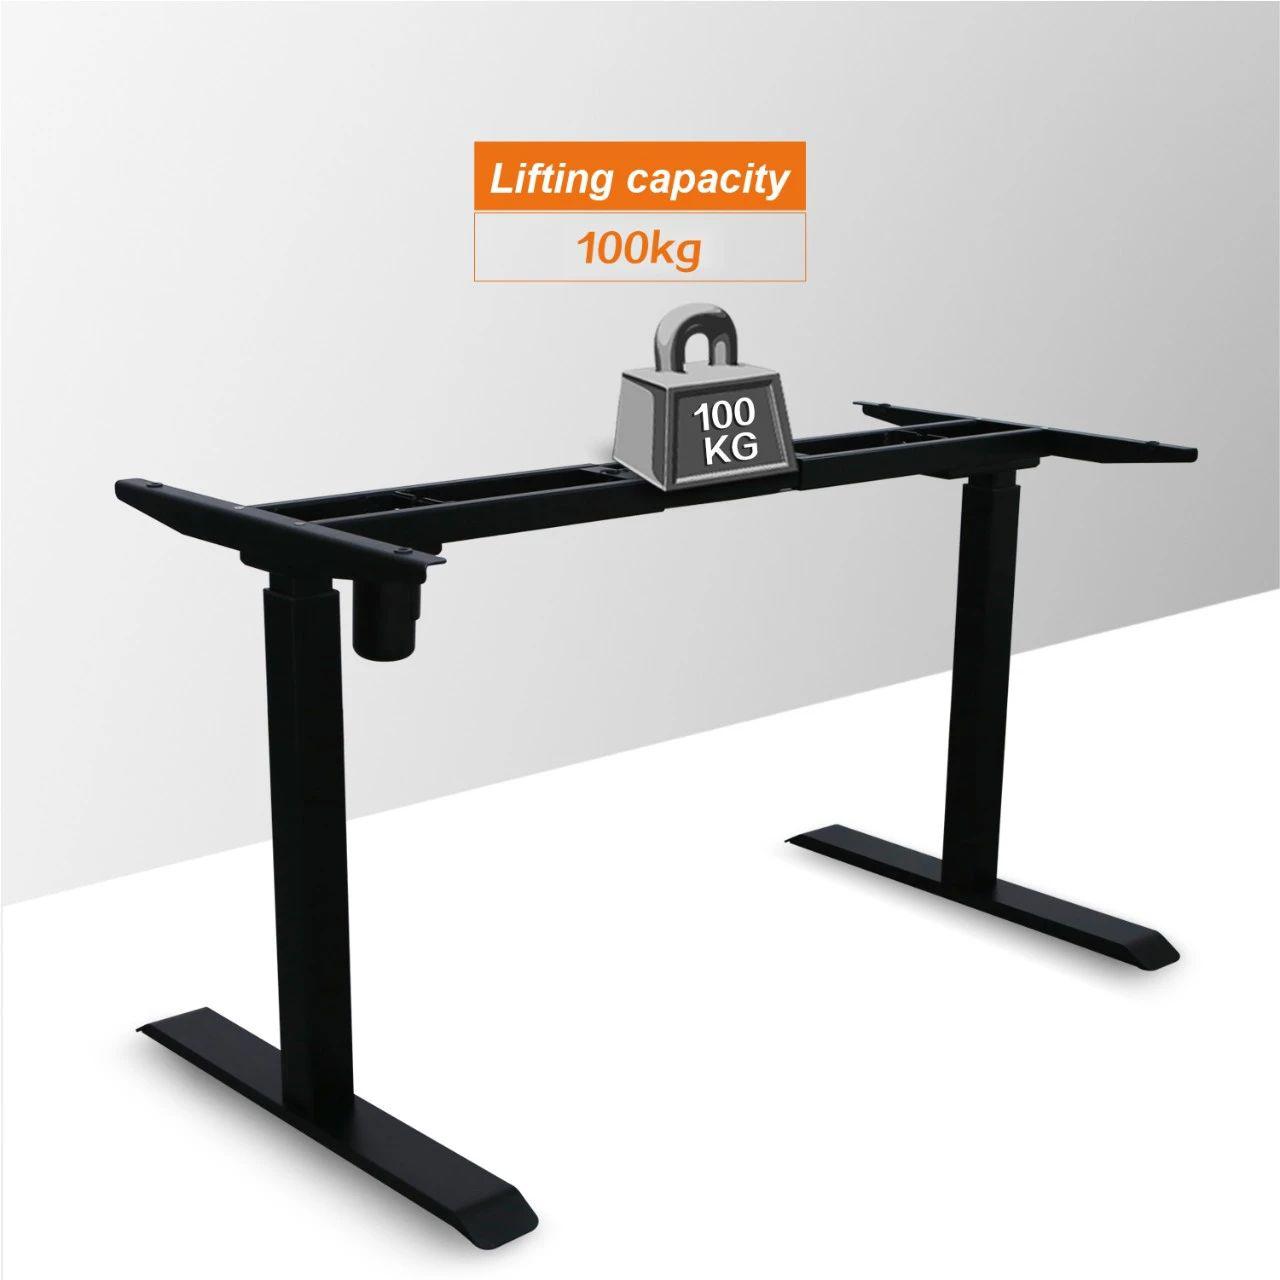 The maximum load bearing capacity of a single motor desk frame is 100kg